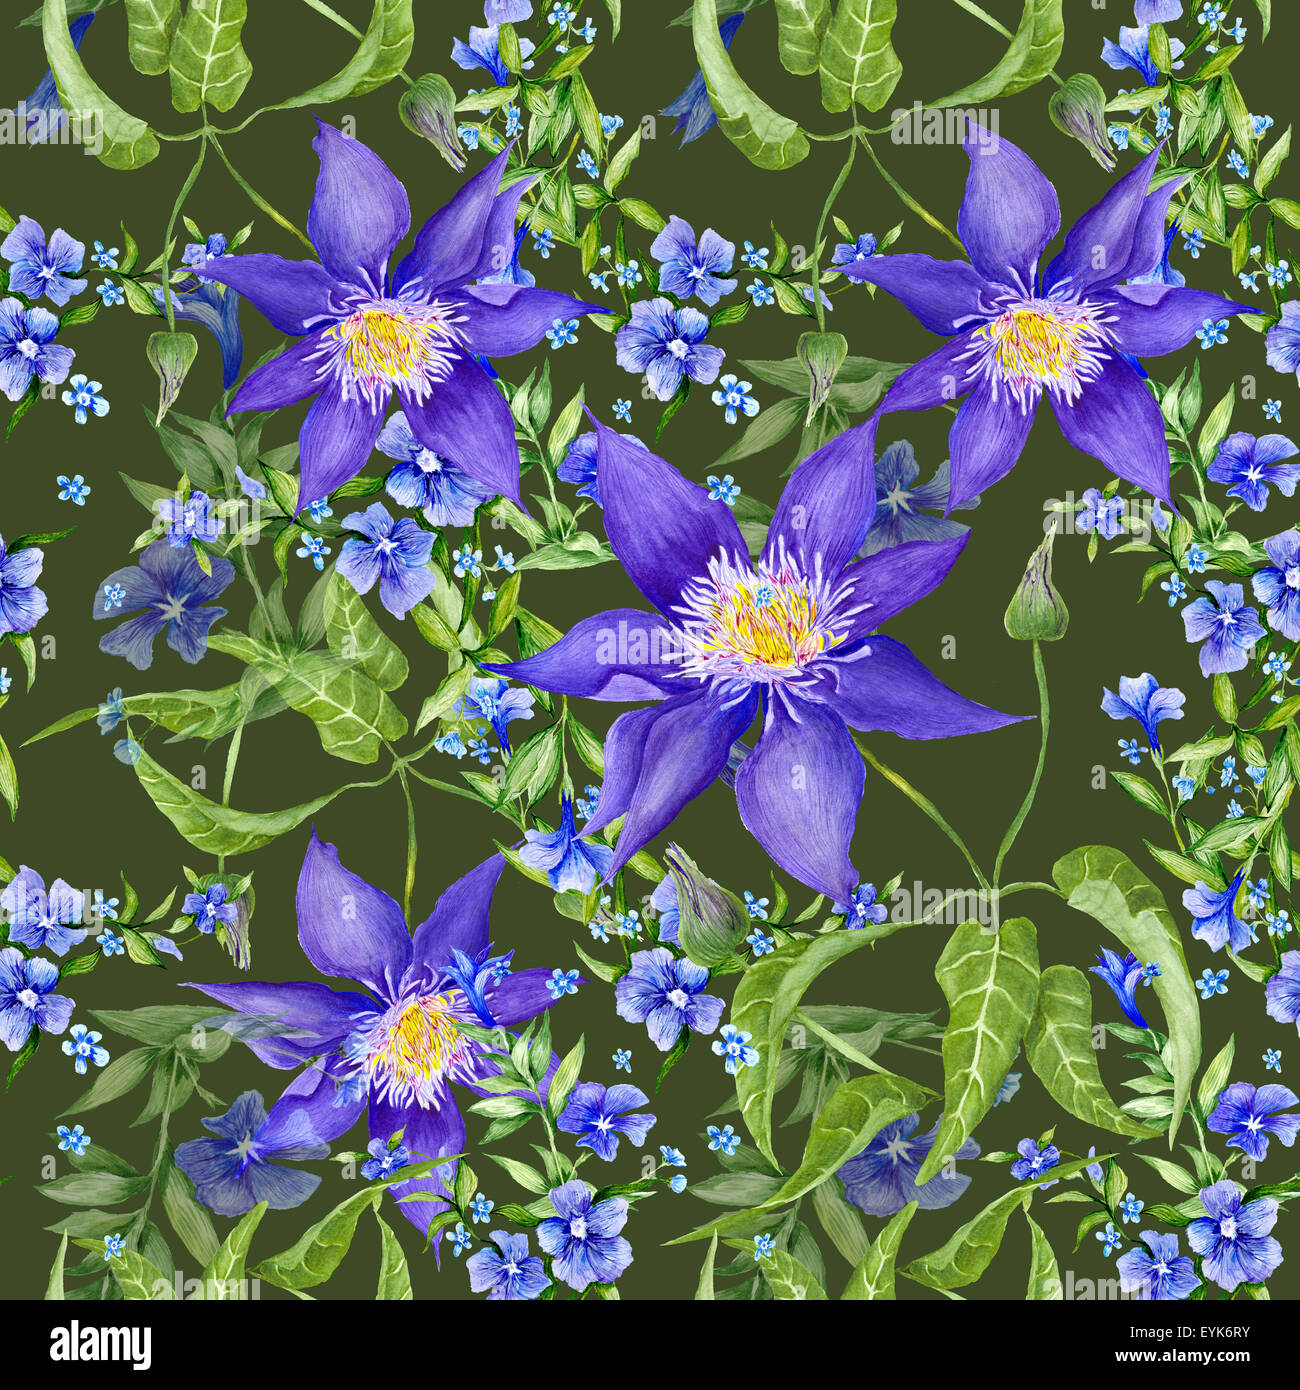 Seamless watercolor pattern with purple clematis and periwinkle flowers for decor Stock Photo